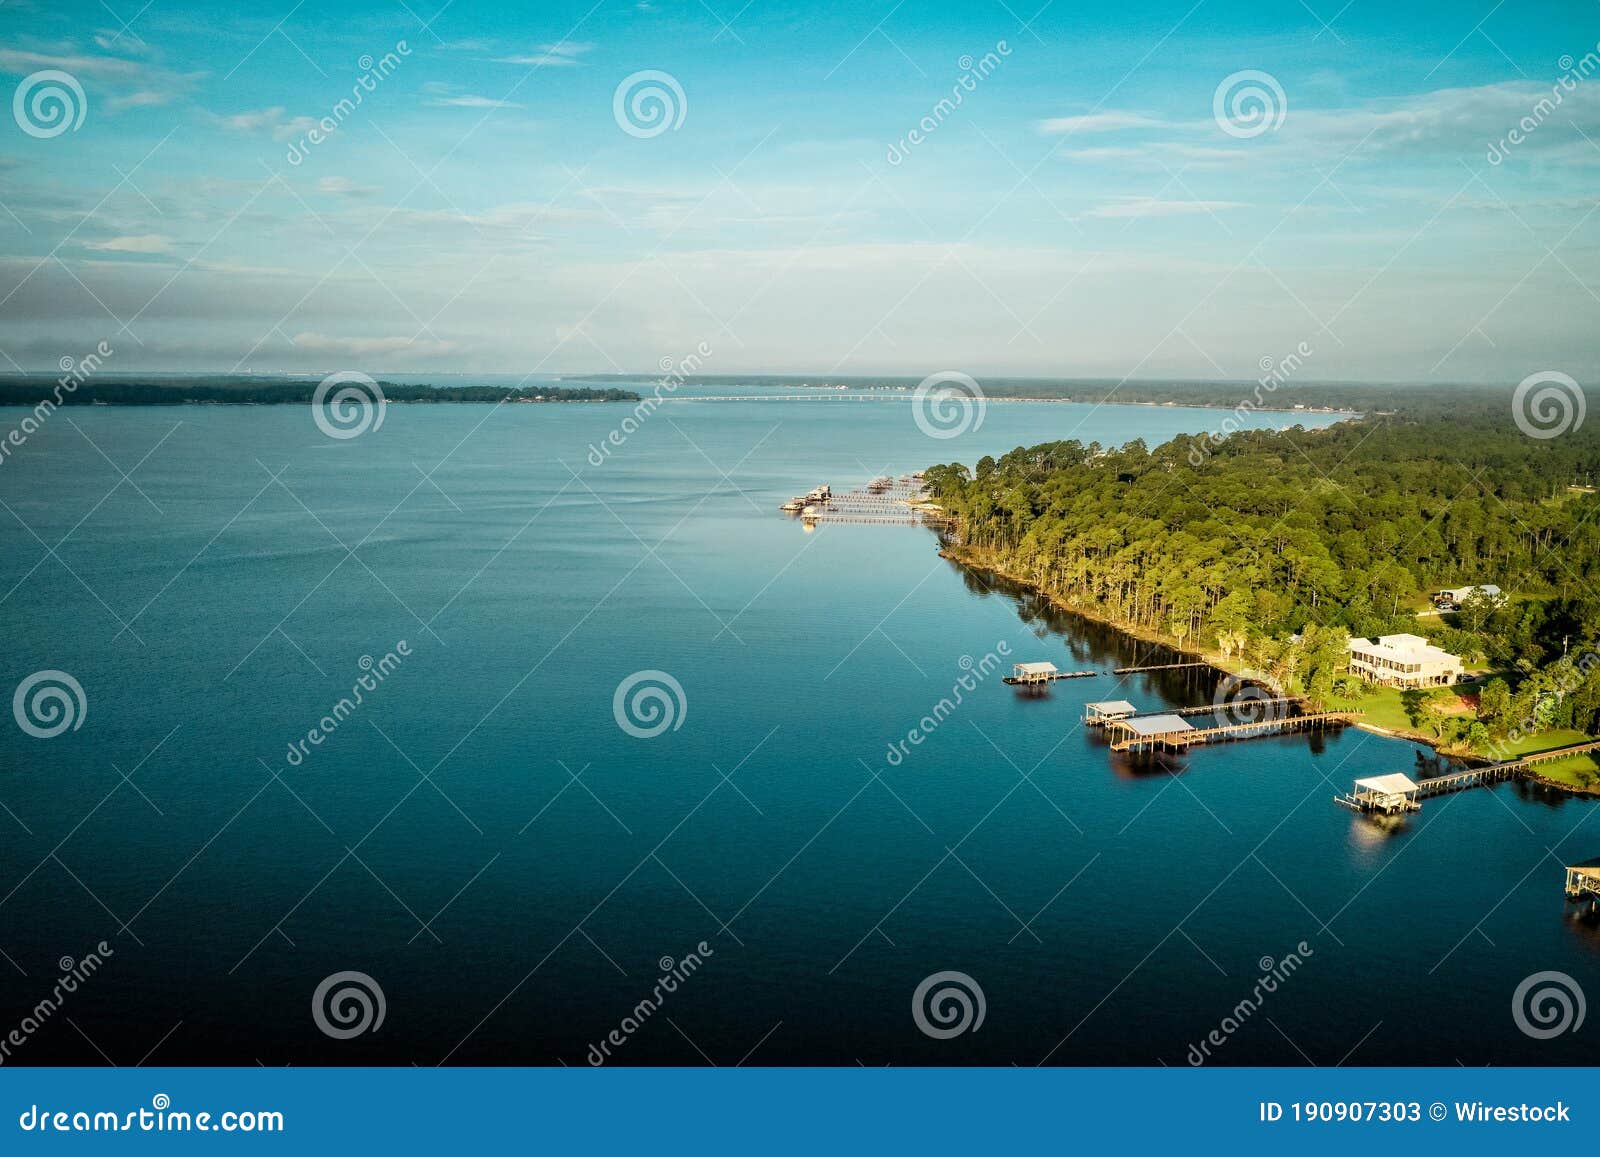 high angle shot of the perdido bay on a bright summer morning on the coast